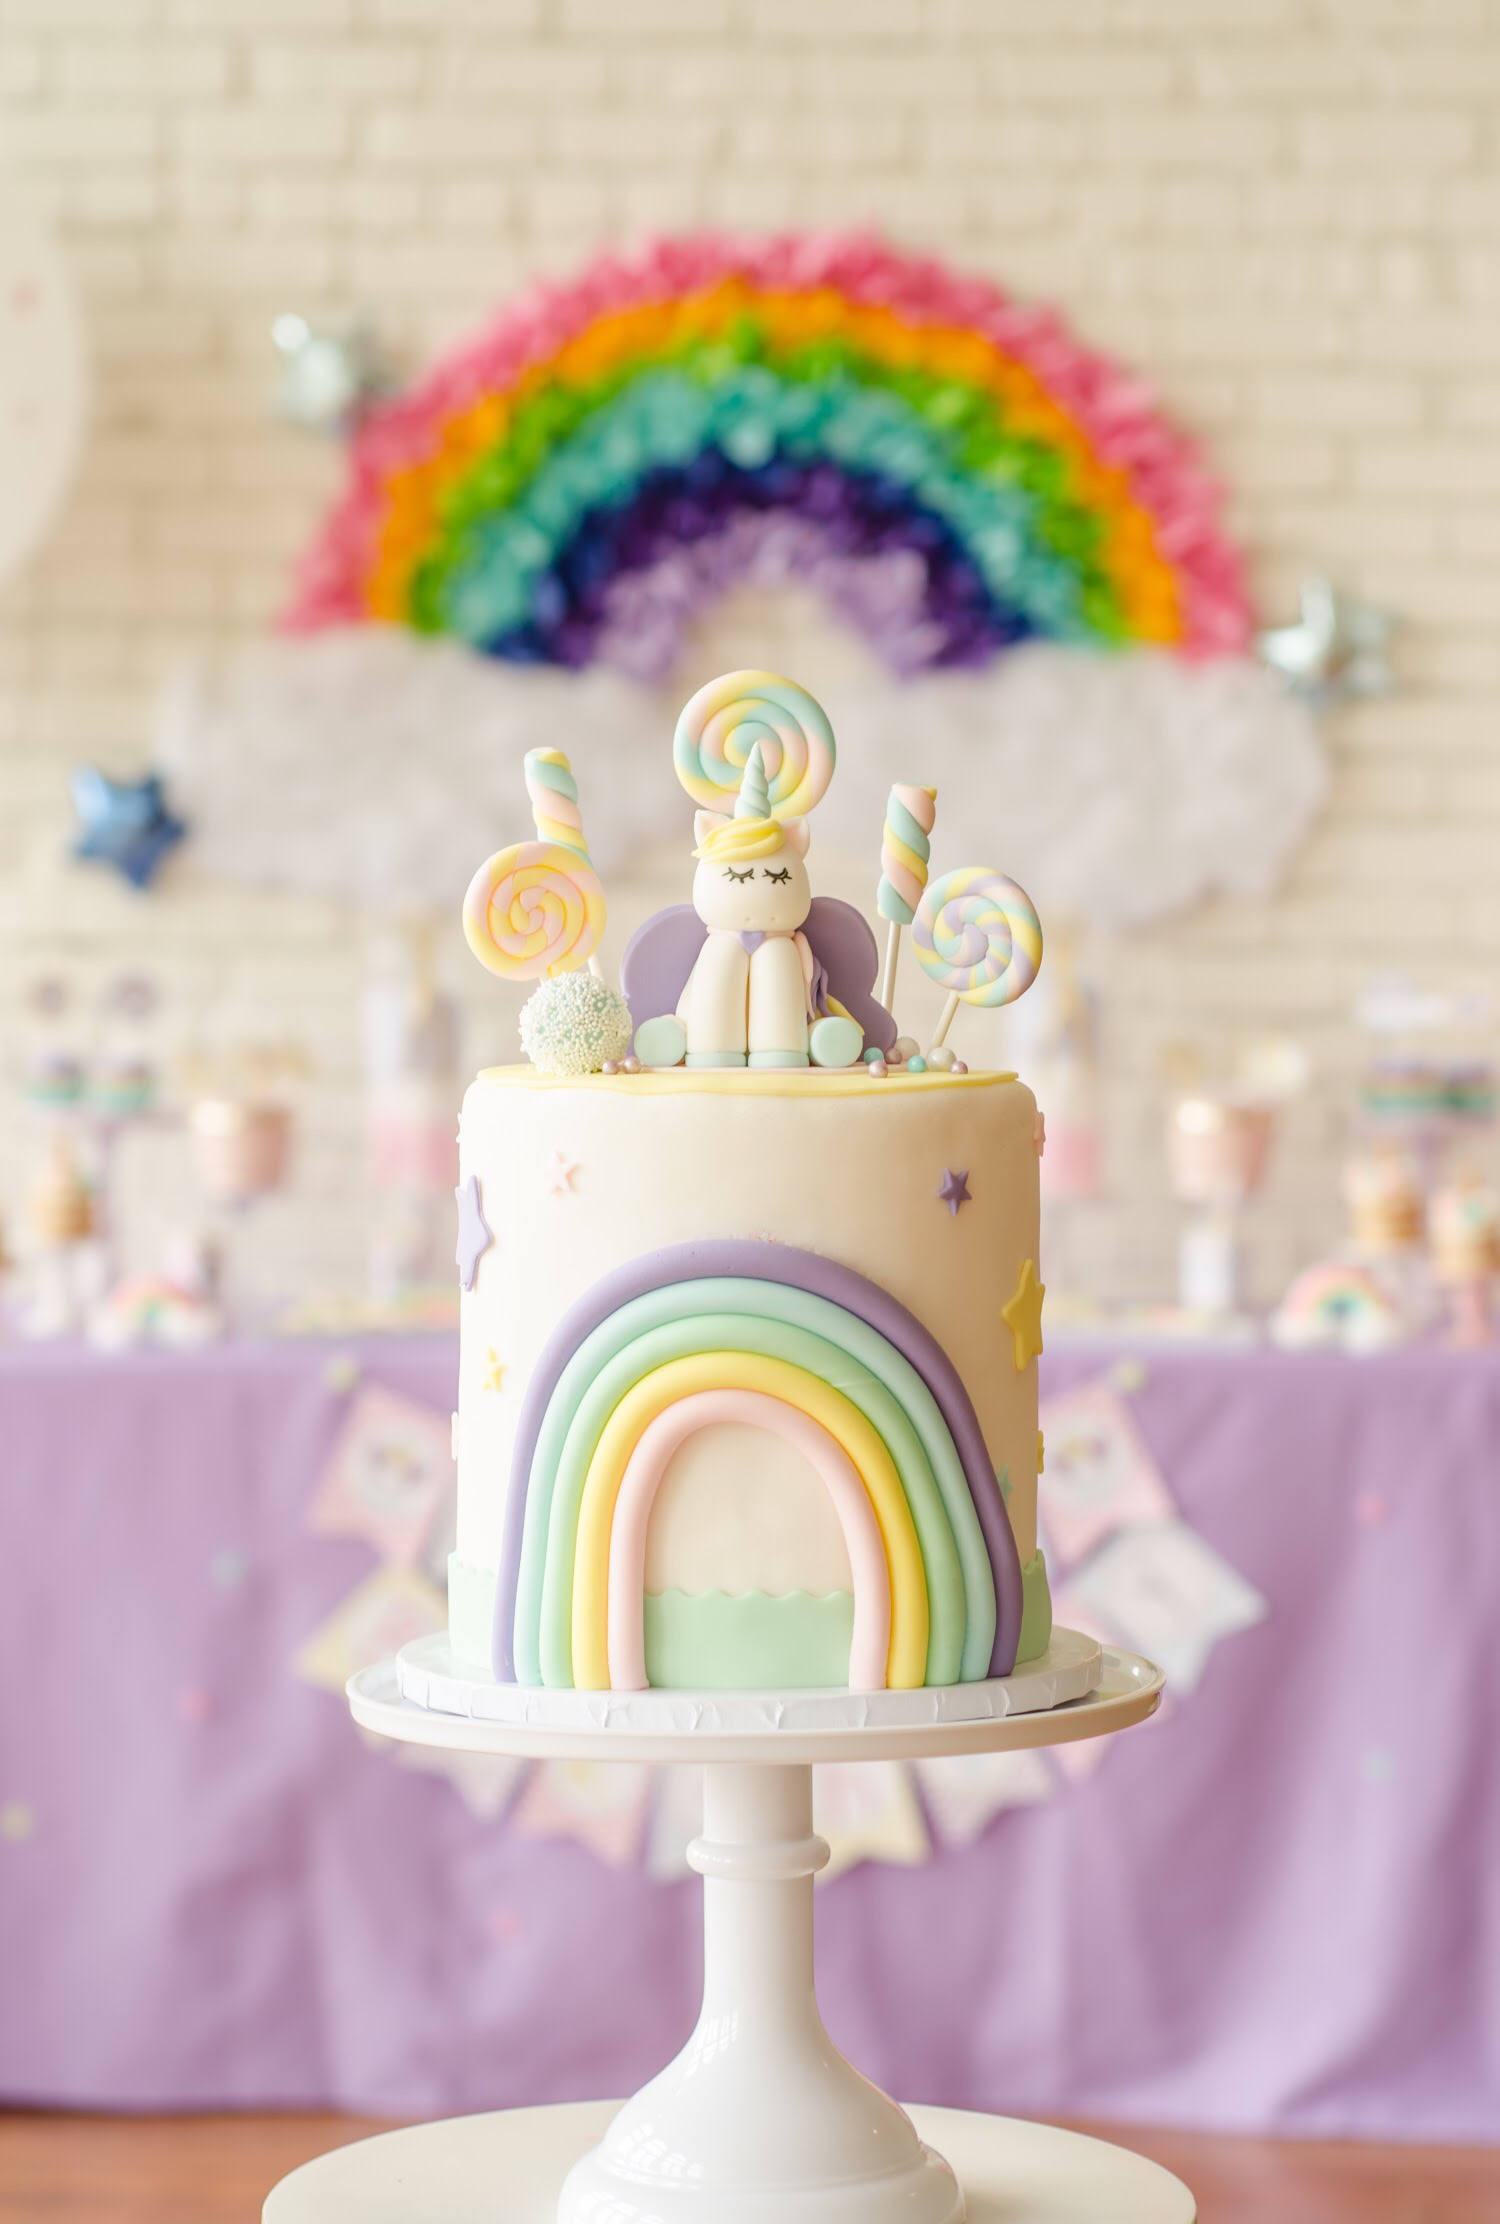 Rainbow Party Printables and decorations - My Party Design